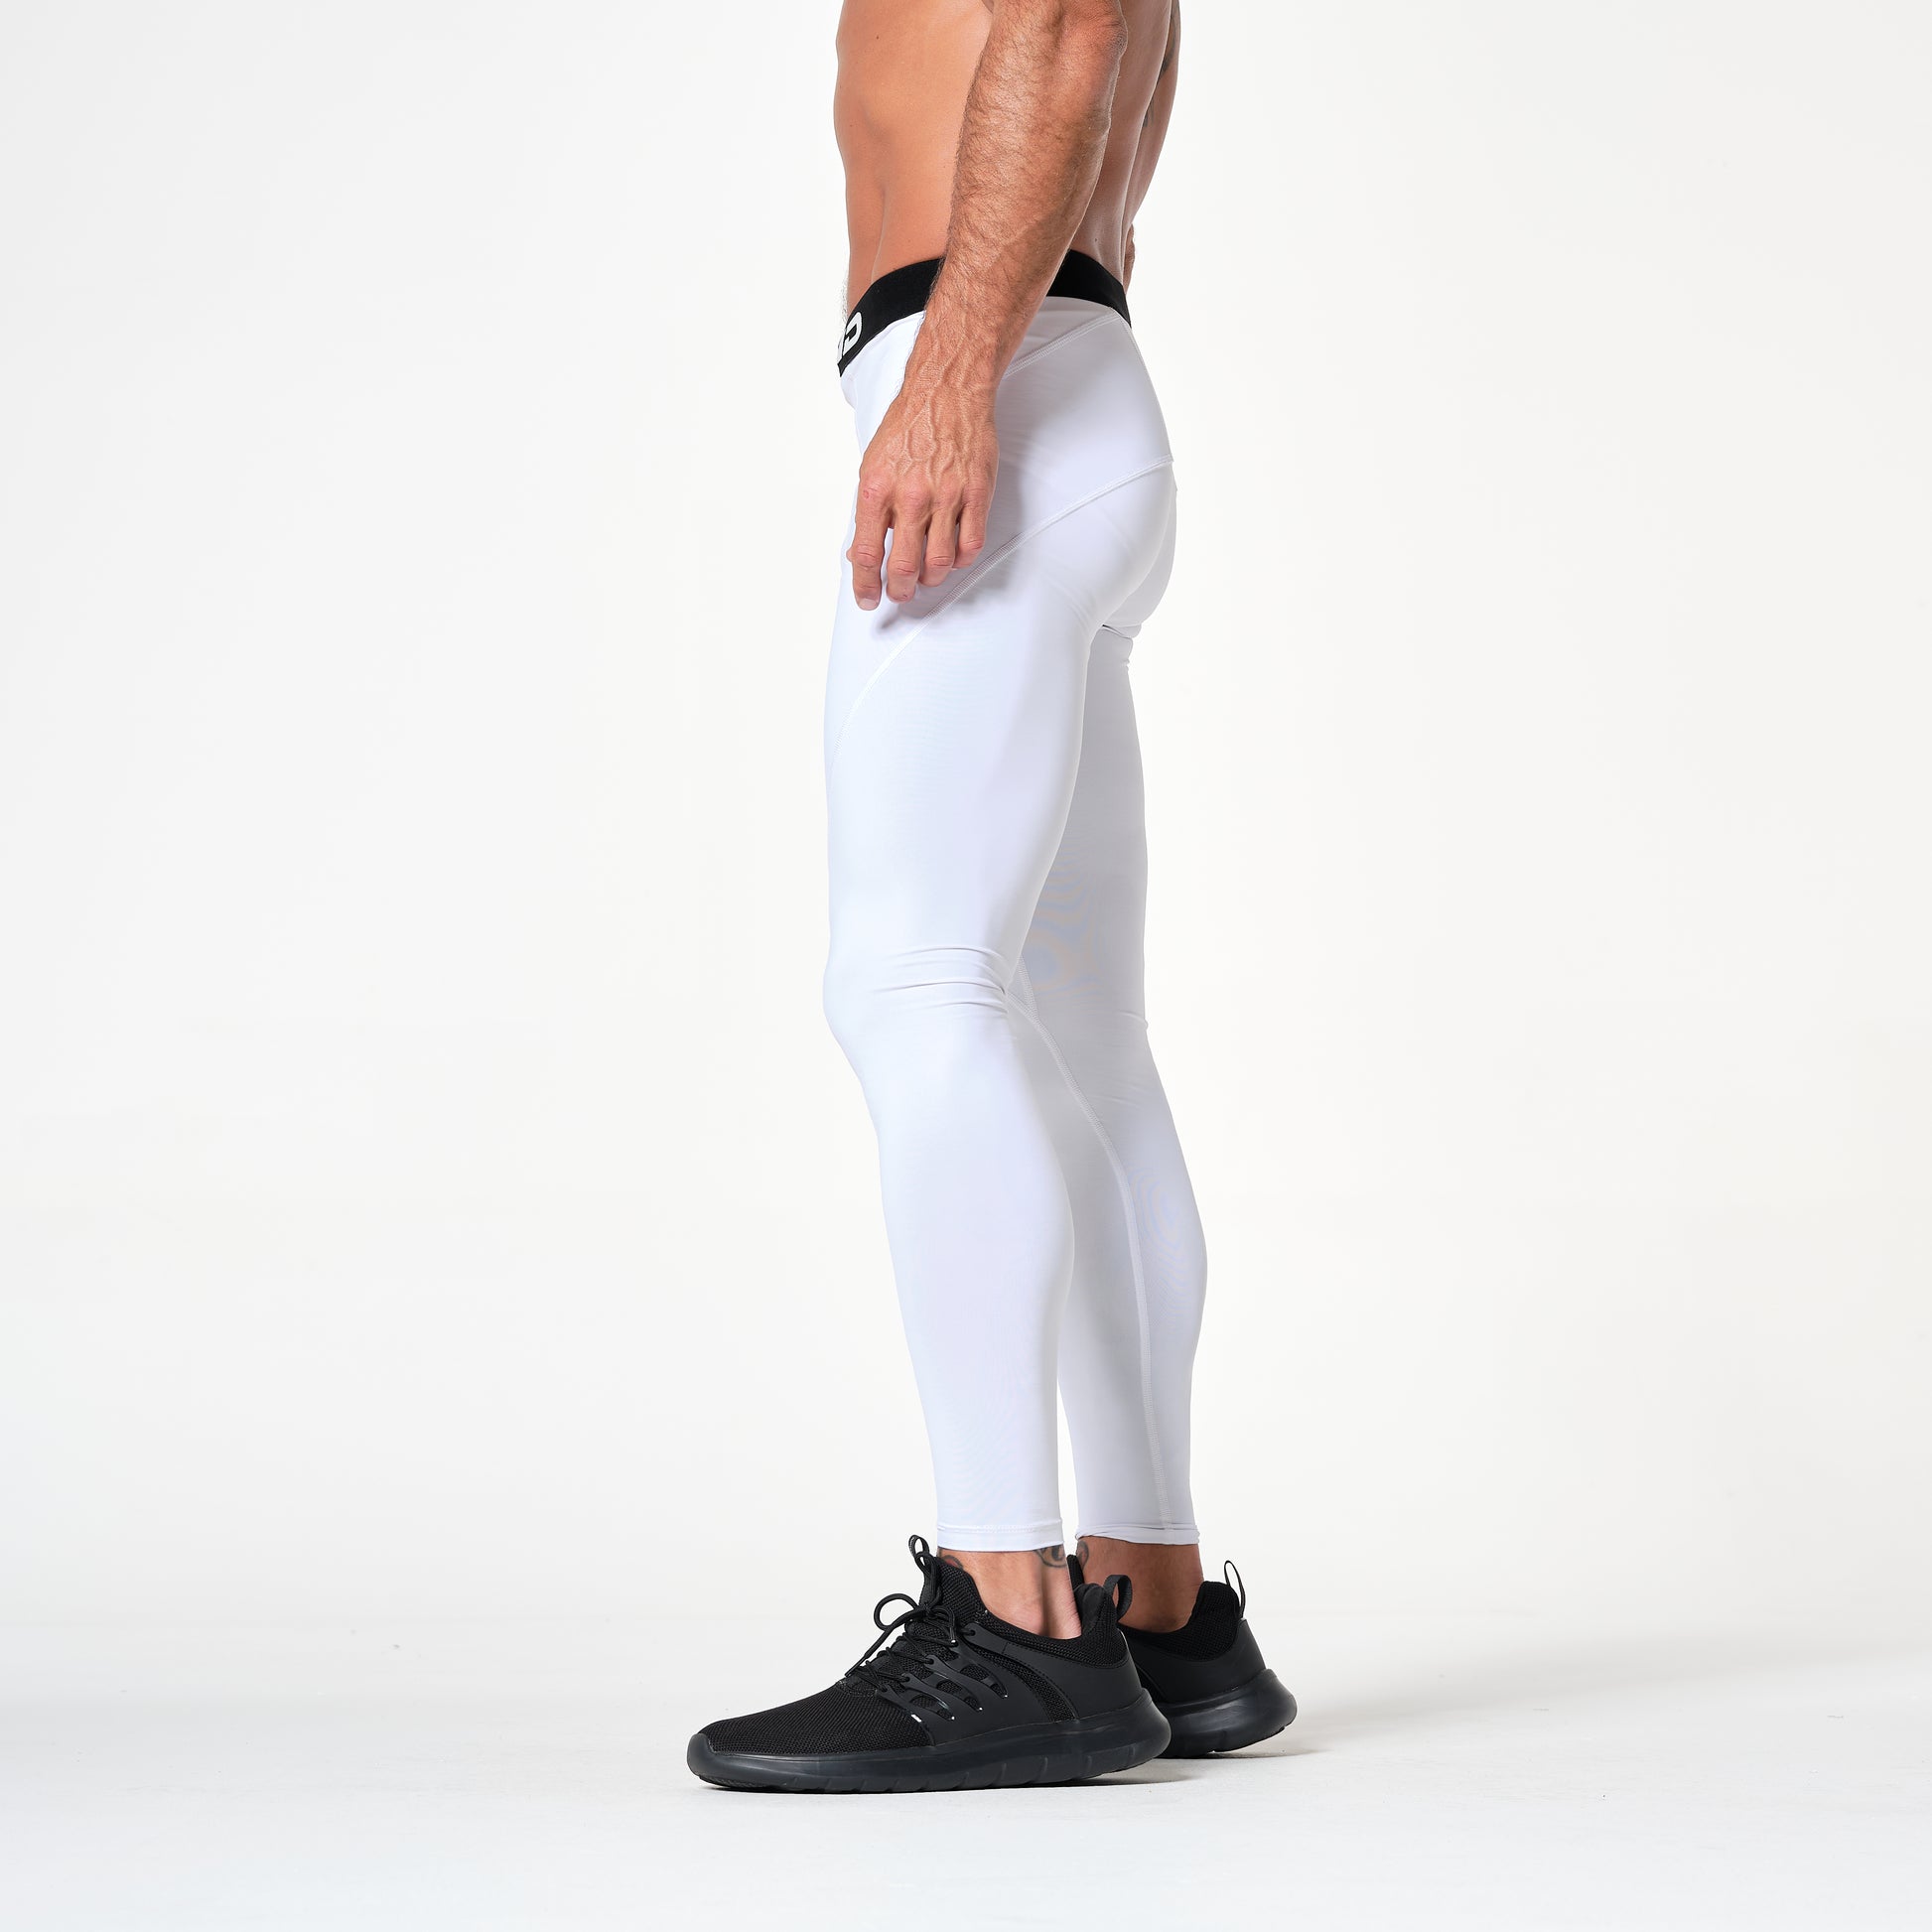 MISSION 'VaporActive Voltage' Men's Compression Running Tights White S  **NWT**